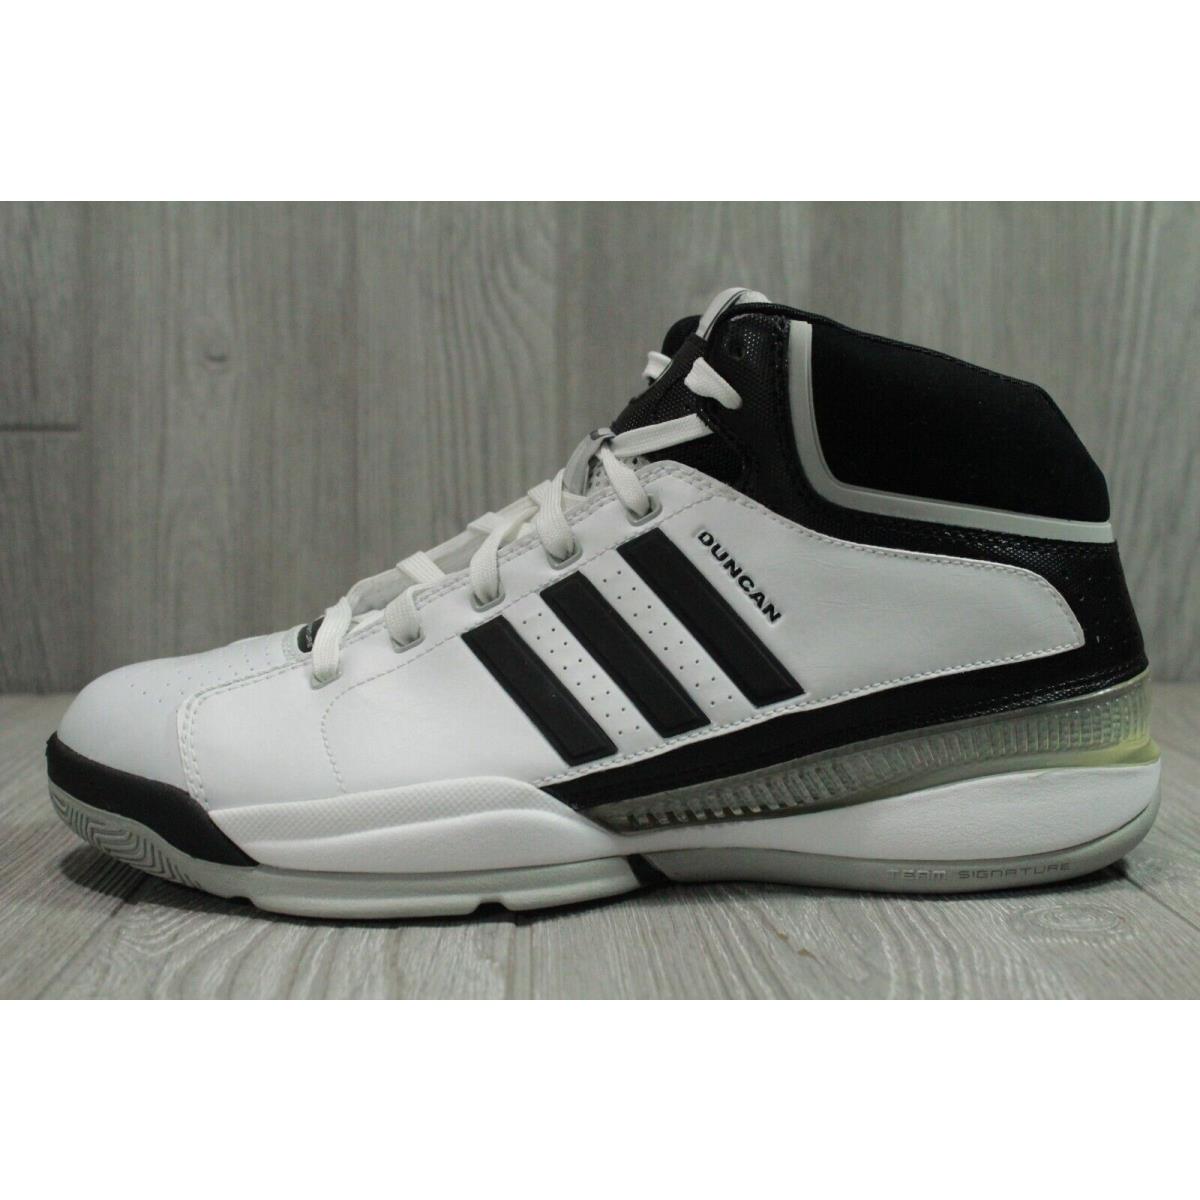 Vintage Adidas TS Lightswitch Play Tim Duncan 2007 Shoes Mens 9.5 - 12 Oss